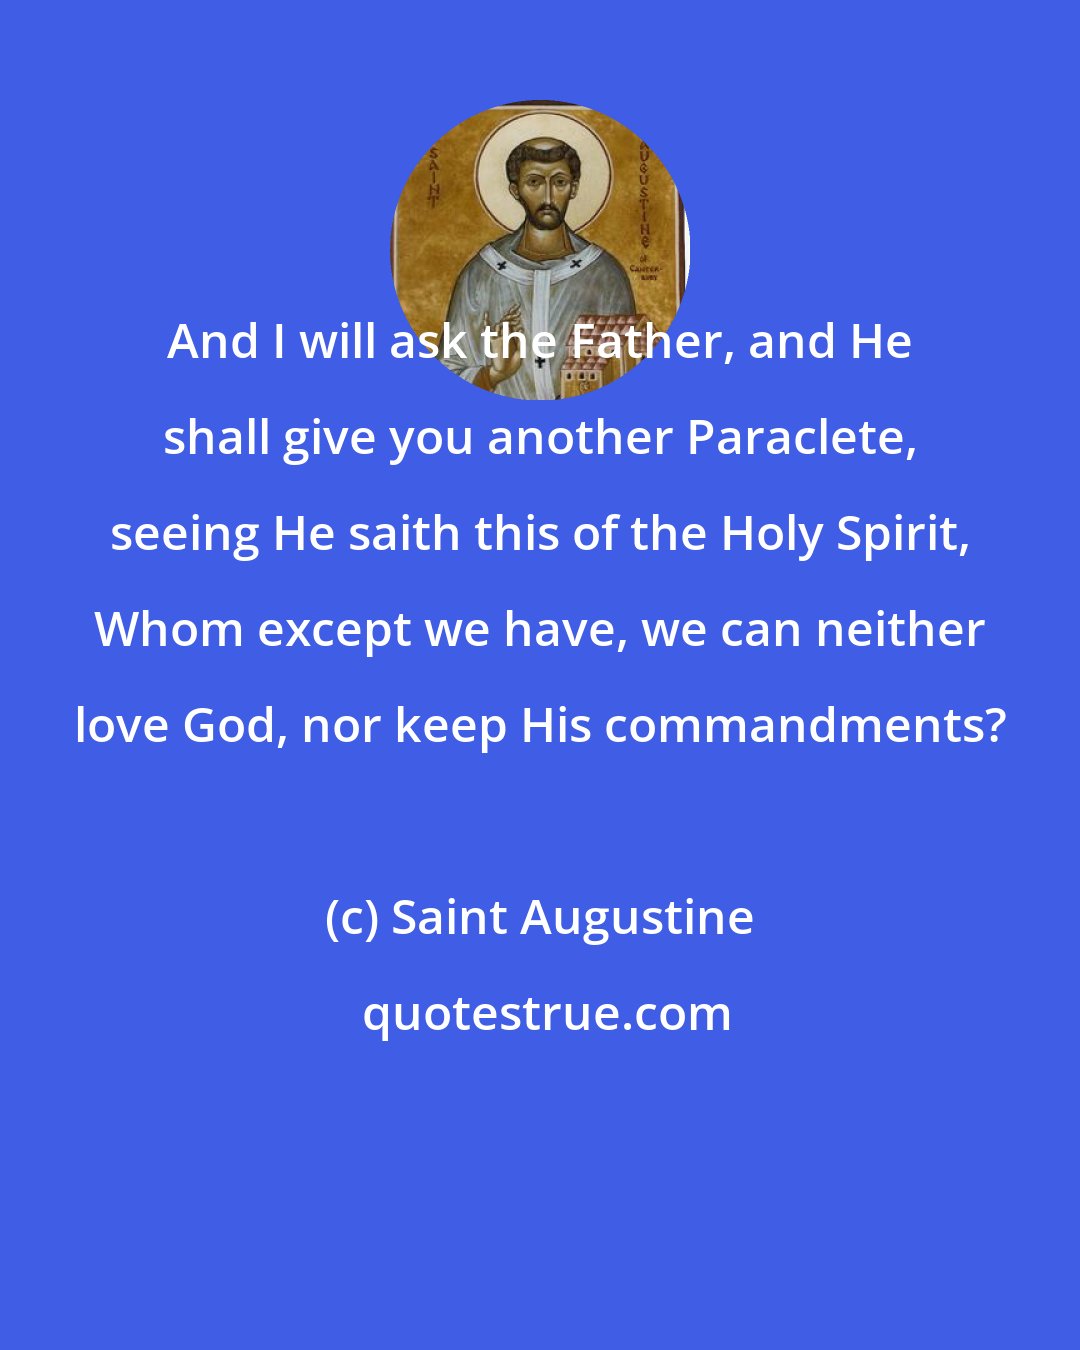 Saint Augustine: And I will ask the Father, and He shall give you another Paraclete, seeing He saith this of the Holy Spirit, Whom except we have, we can neither love God, nor keep His commandments?